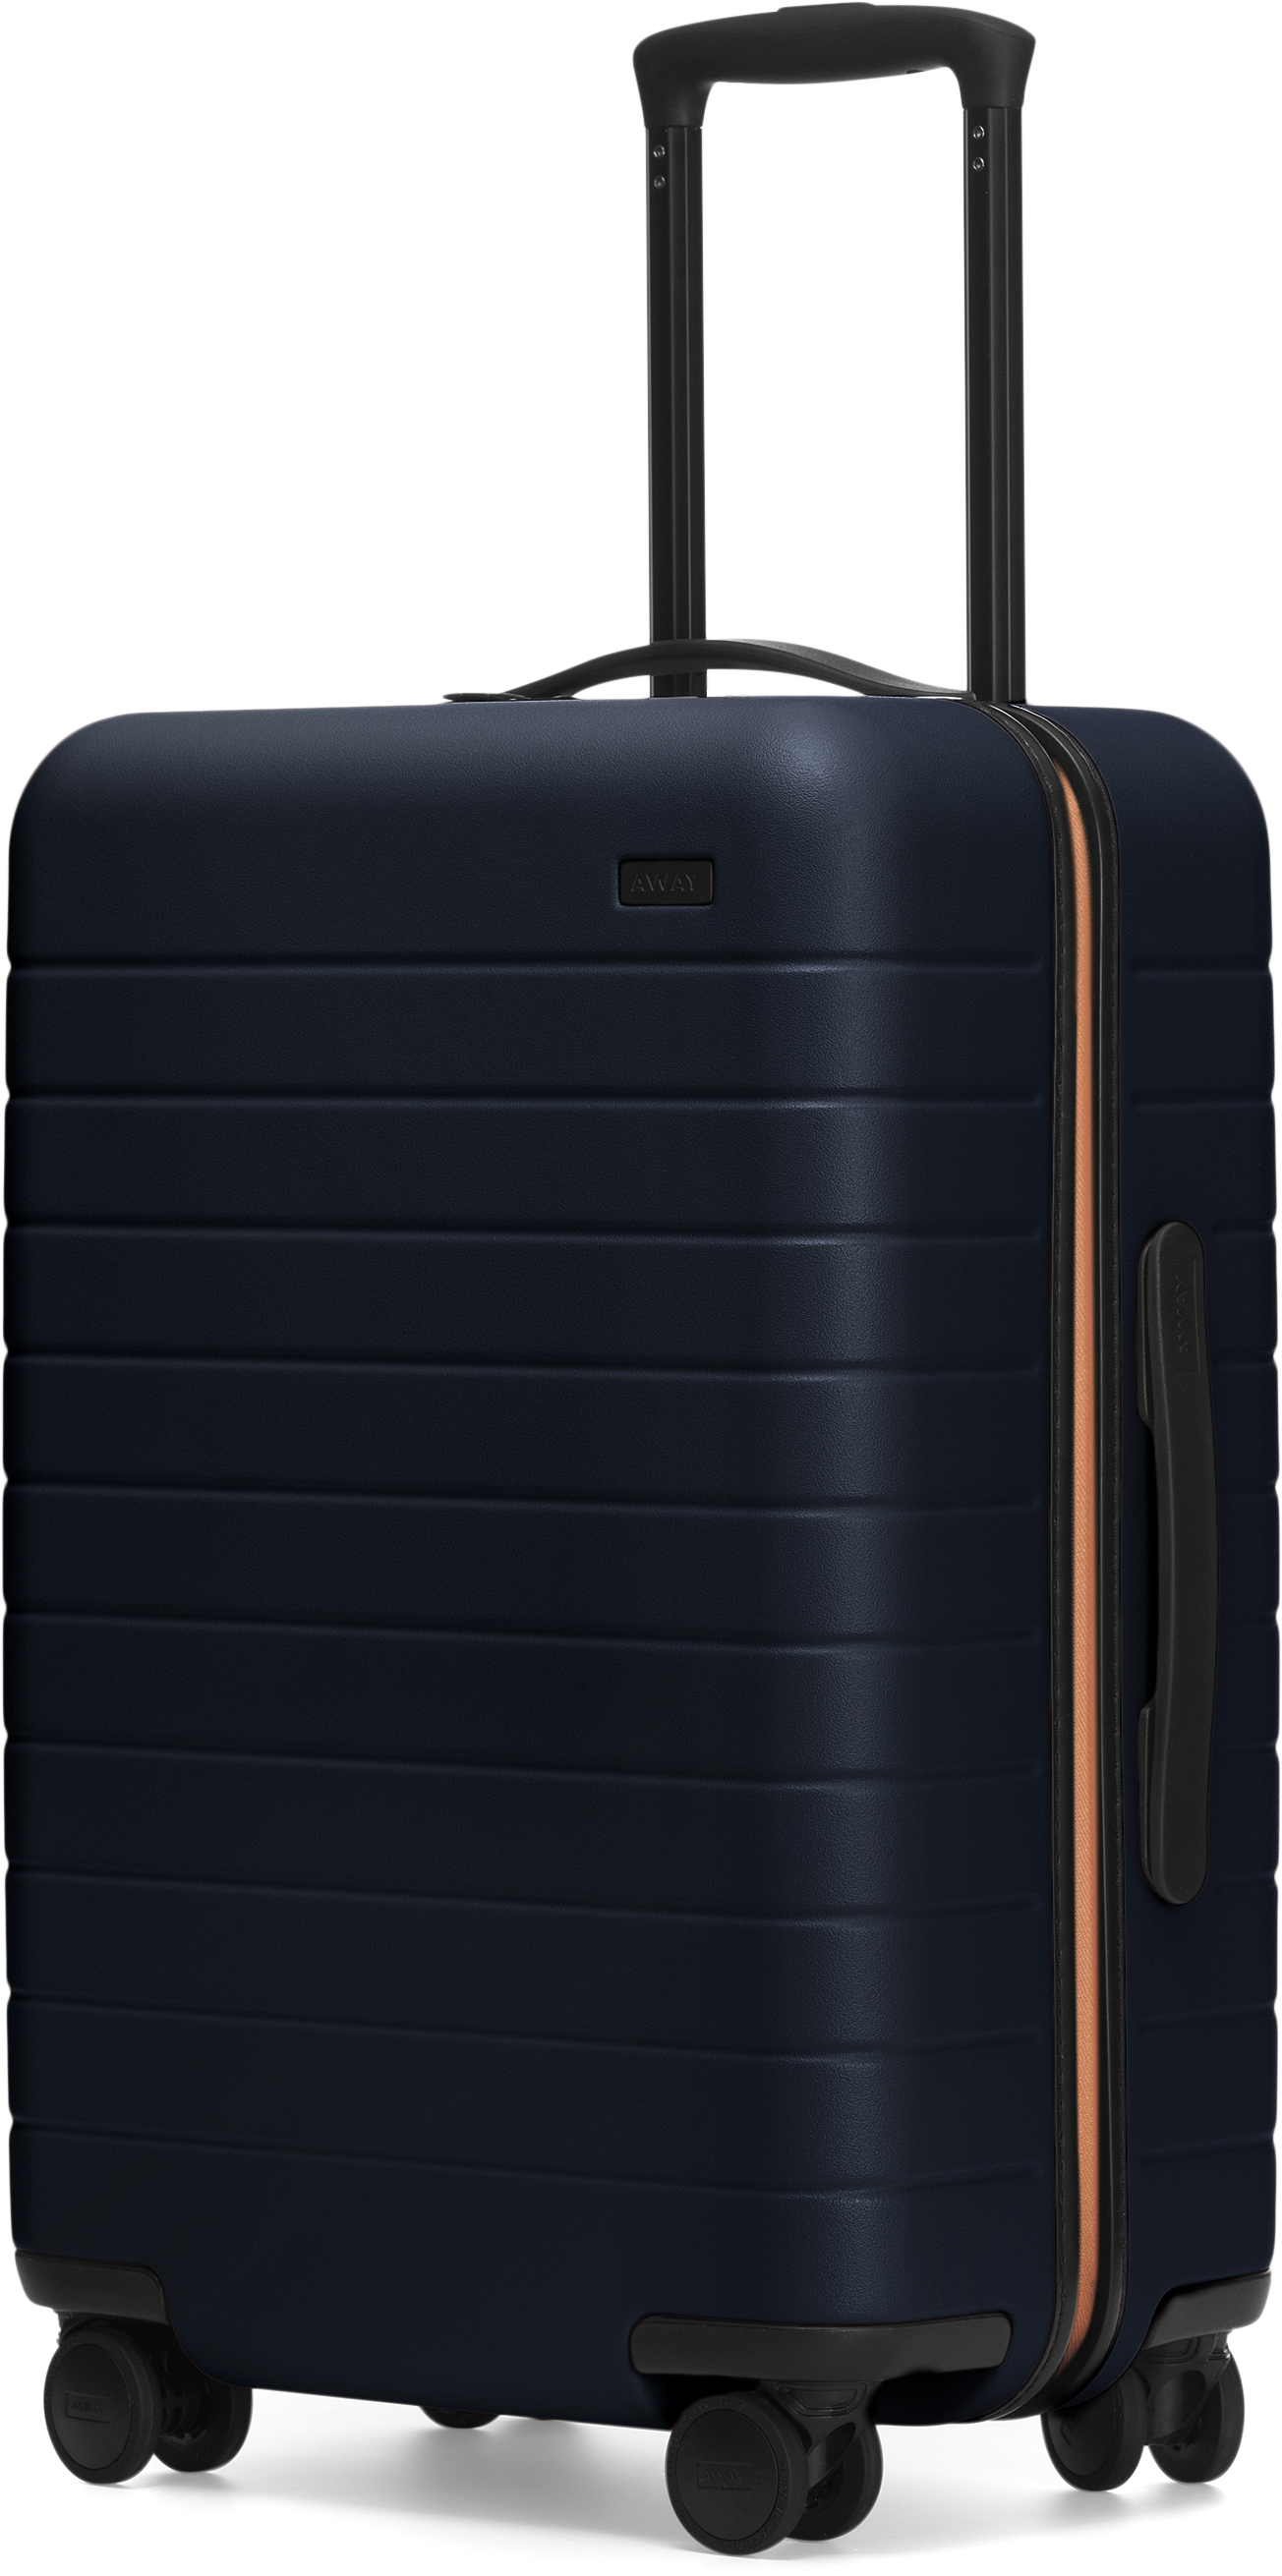 A Black Suitcase With A Handle